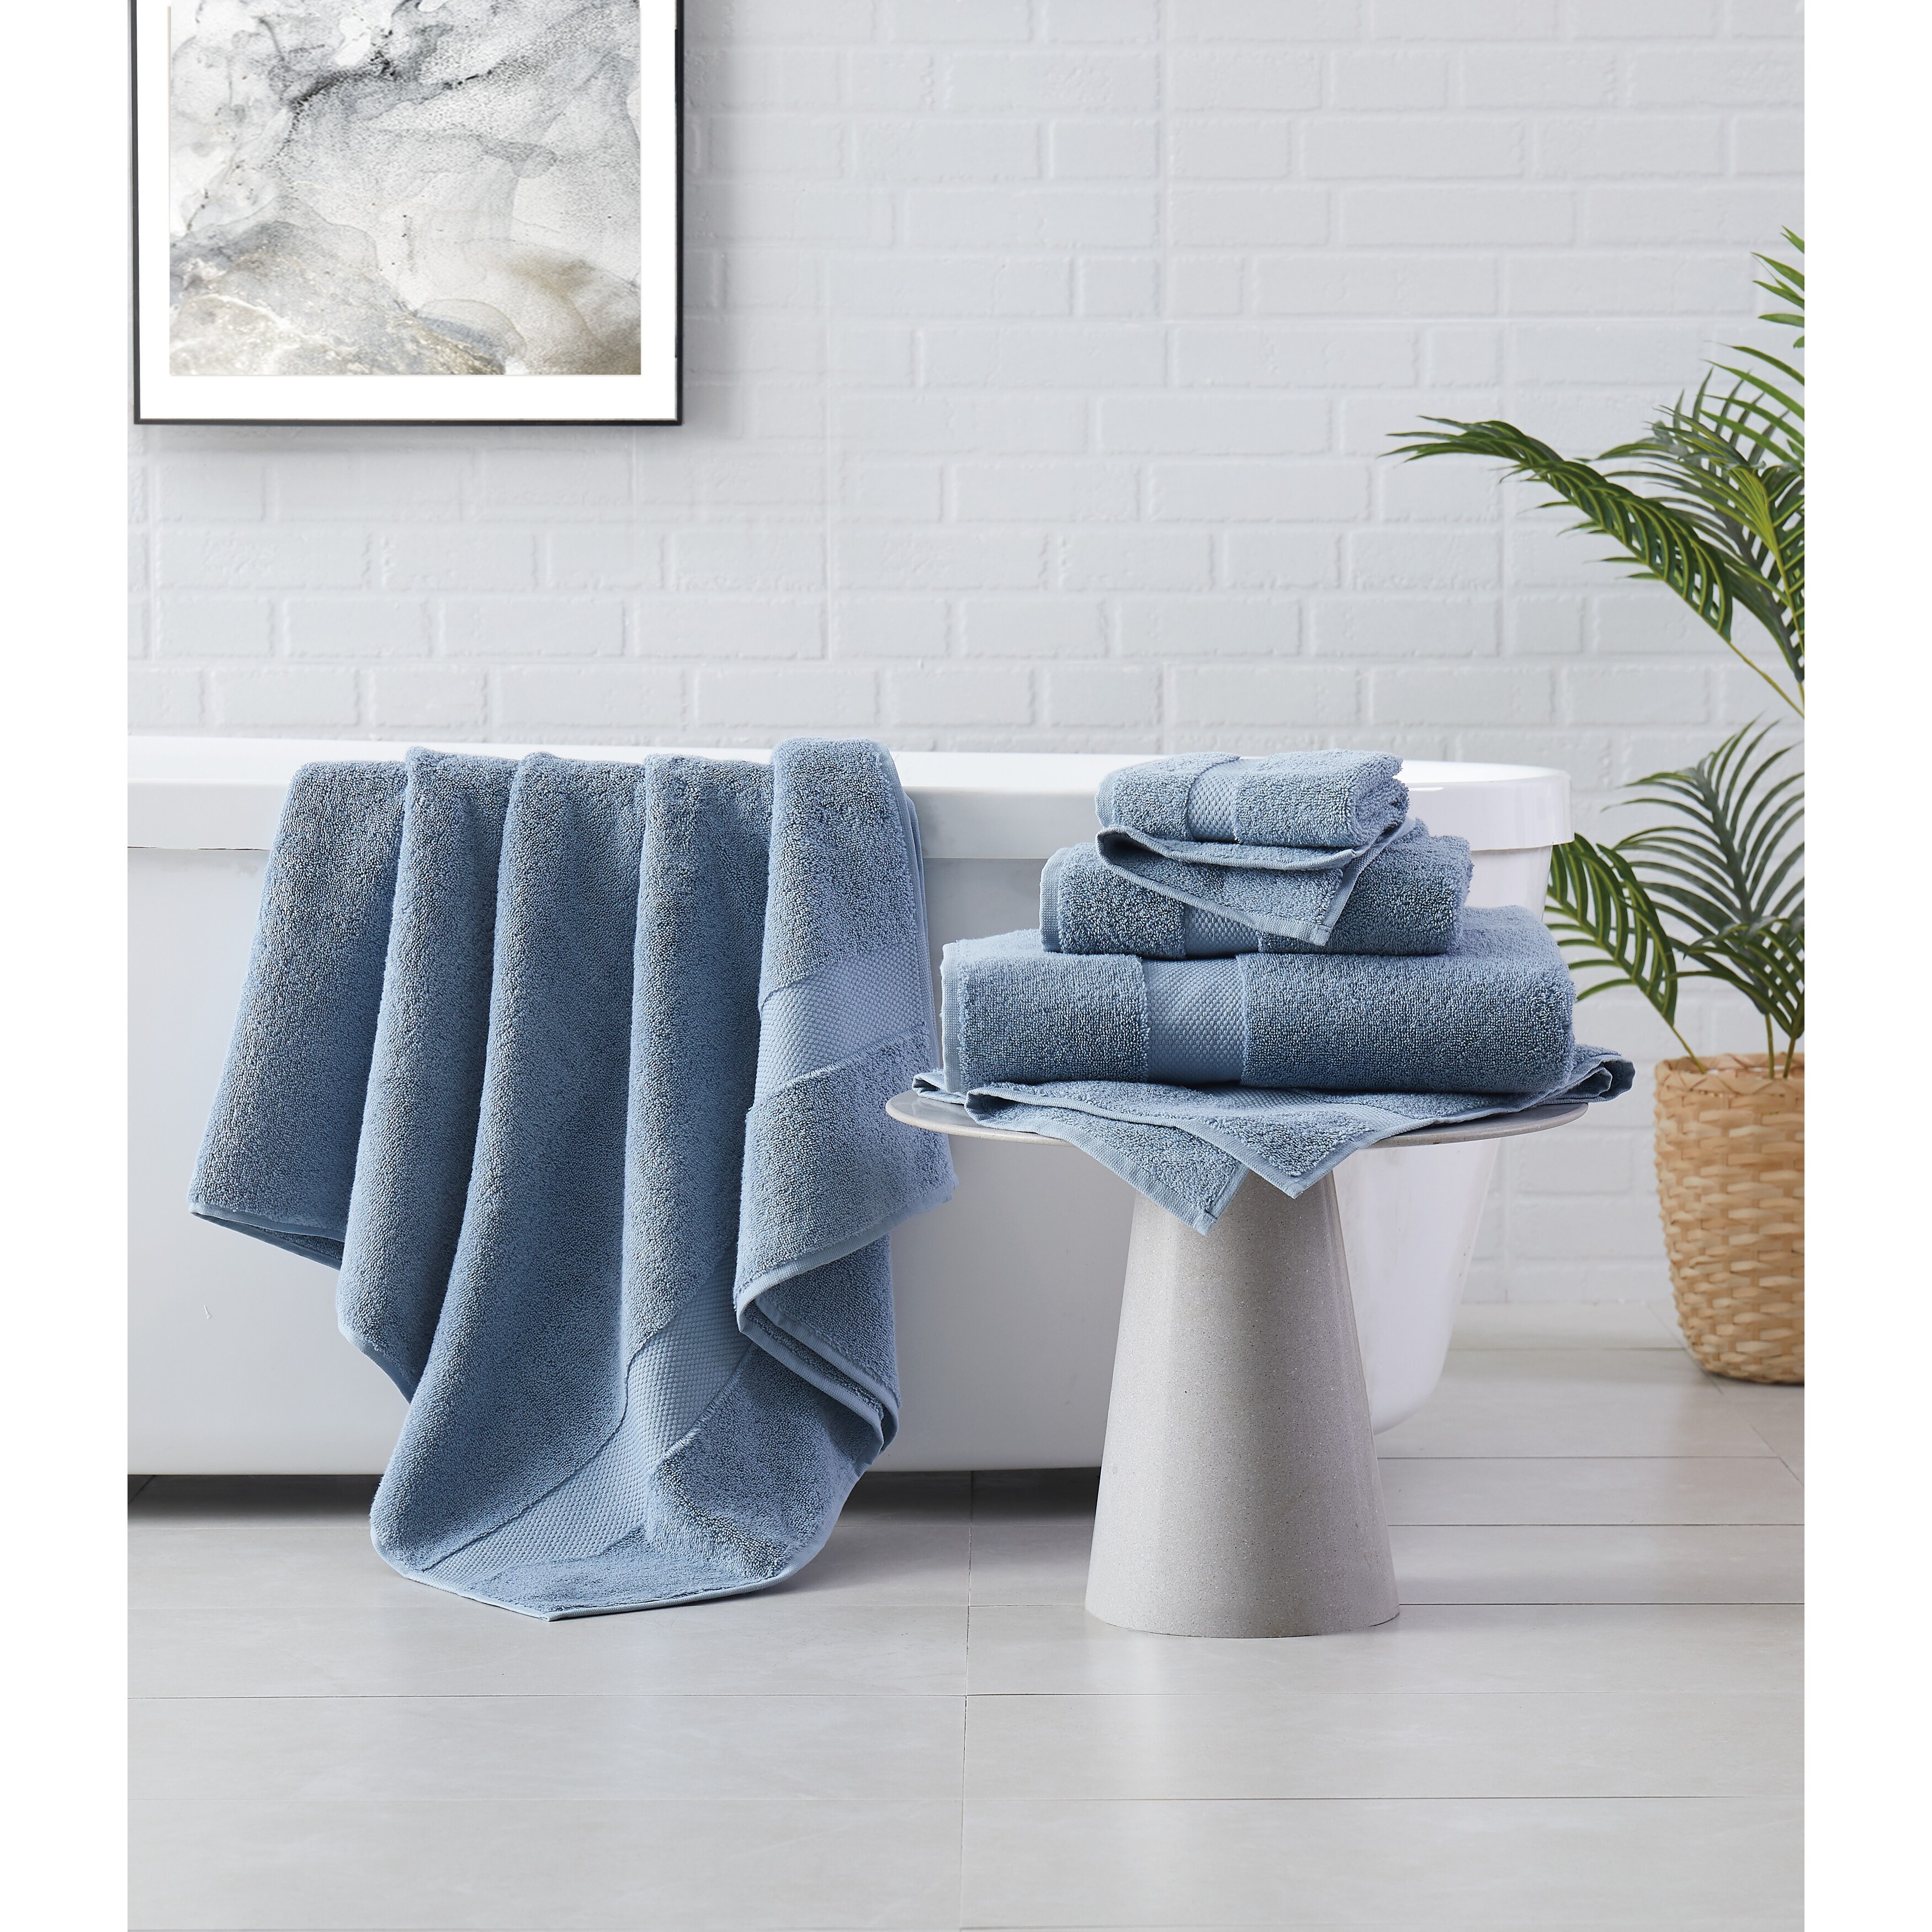 https://ak1.ostkcdn.com/images/products/is/images/direct/3791bcd49e61ab4b755791918451cd9e34668893/Brooklyn-Loom-Solid-Turkish-Cotton-6-Piece-Towel-Set.jpg